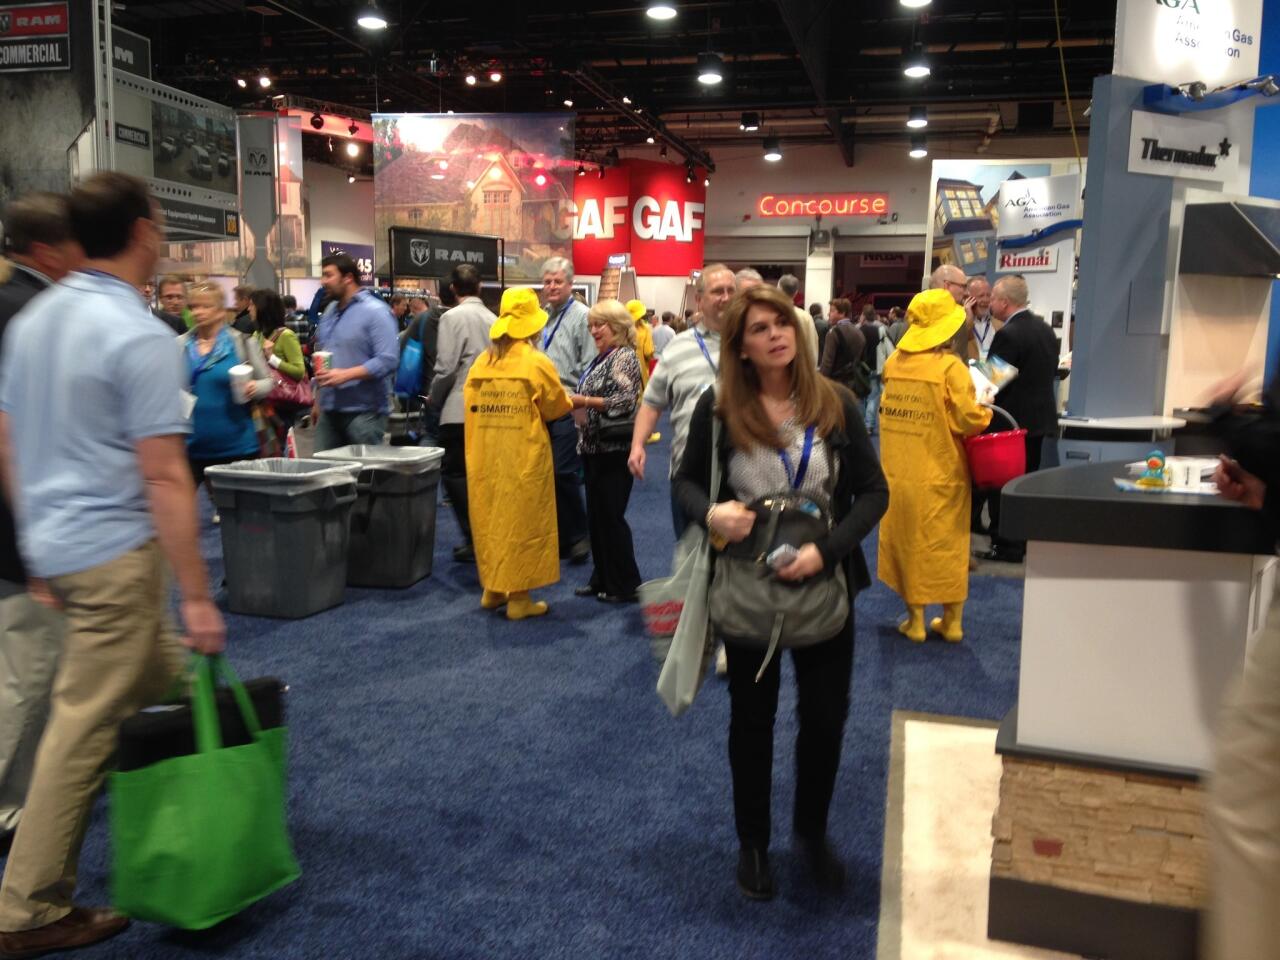 Models in rain hats, coats and boots handed out rubber ducks to promote CertainTeed's Smartbatt fiberglass insulation, which regulates moisture in walls.